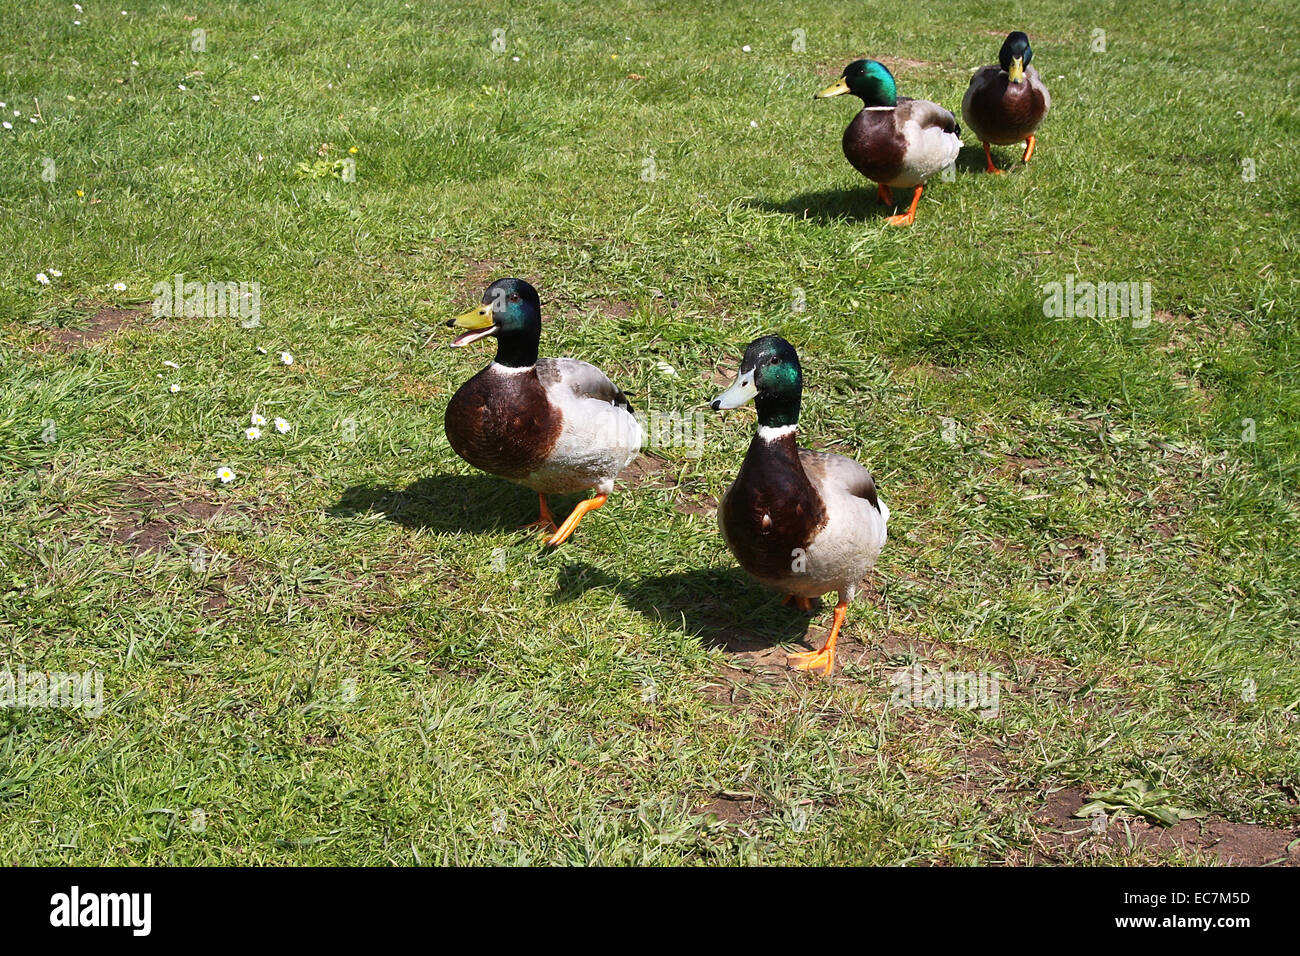 Male Mallard (Anas platyrhynchos) in their breeding plumage. The mallard is the most famous duck and the root form of the domestic duck. Photo: Klaus Nowottnick Date: April 23, 2010 Stock Photo